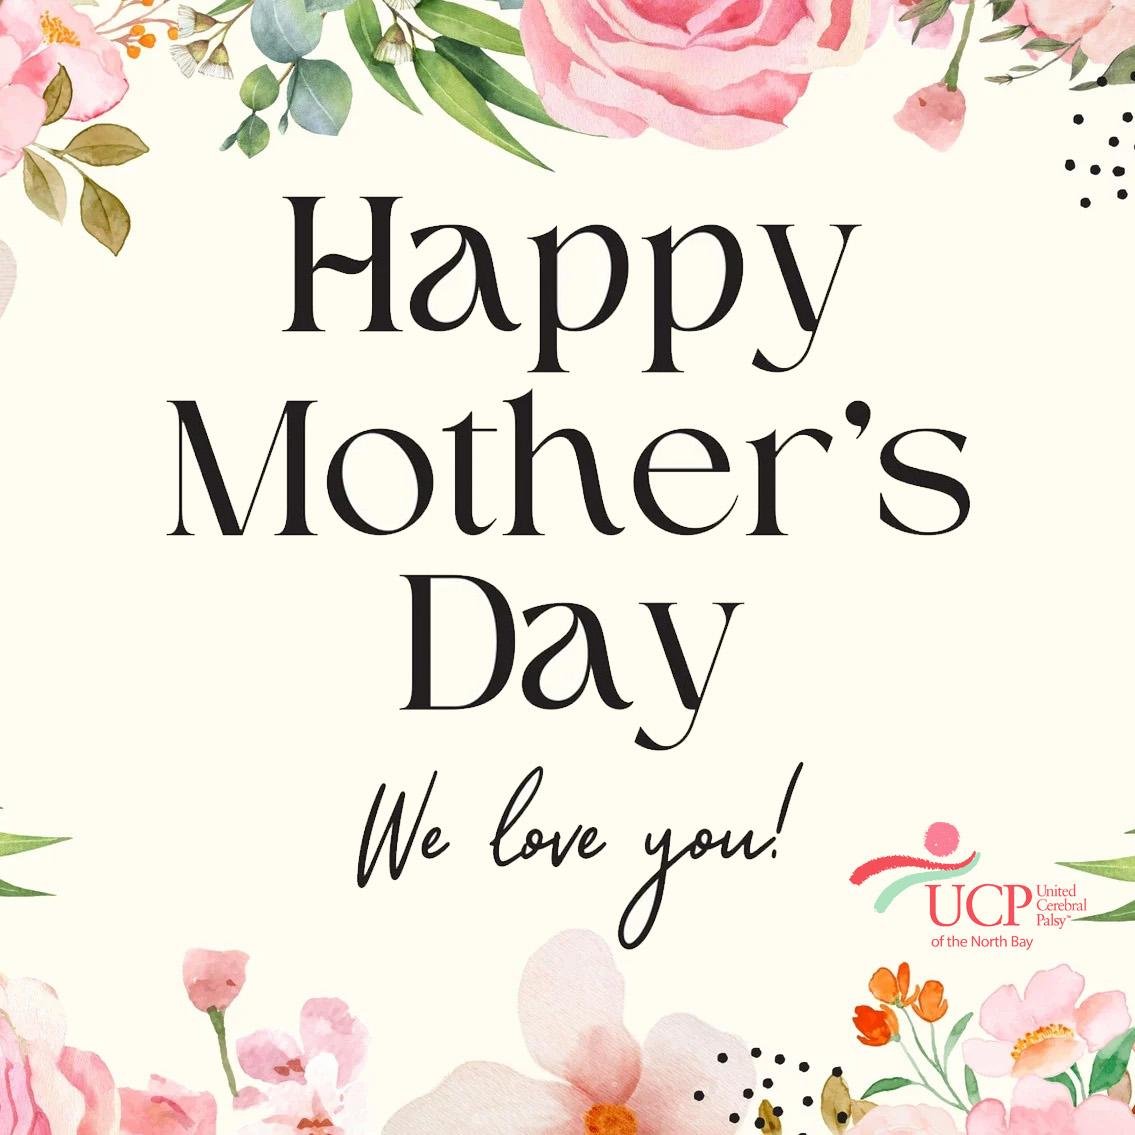 From all of us to all of you, wishing you a wonderful Mother's Day!